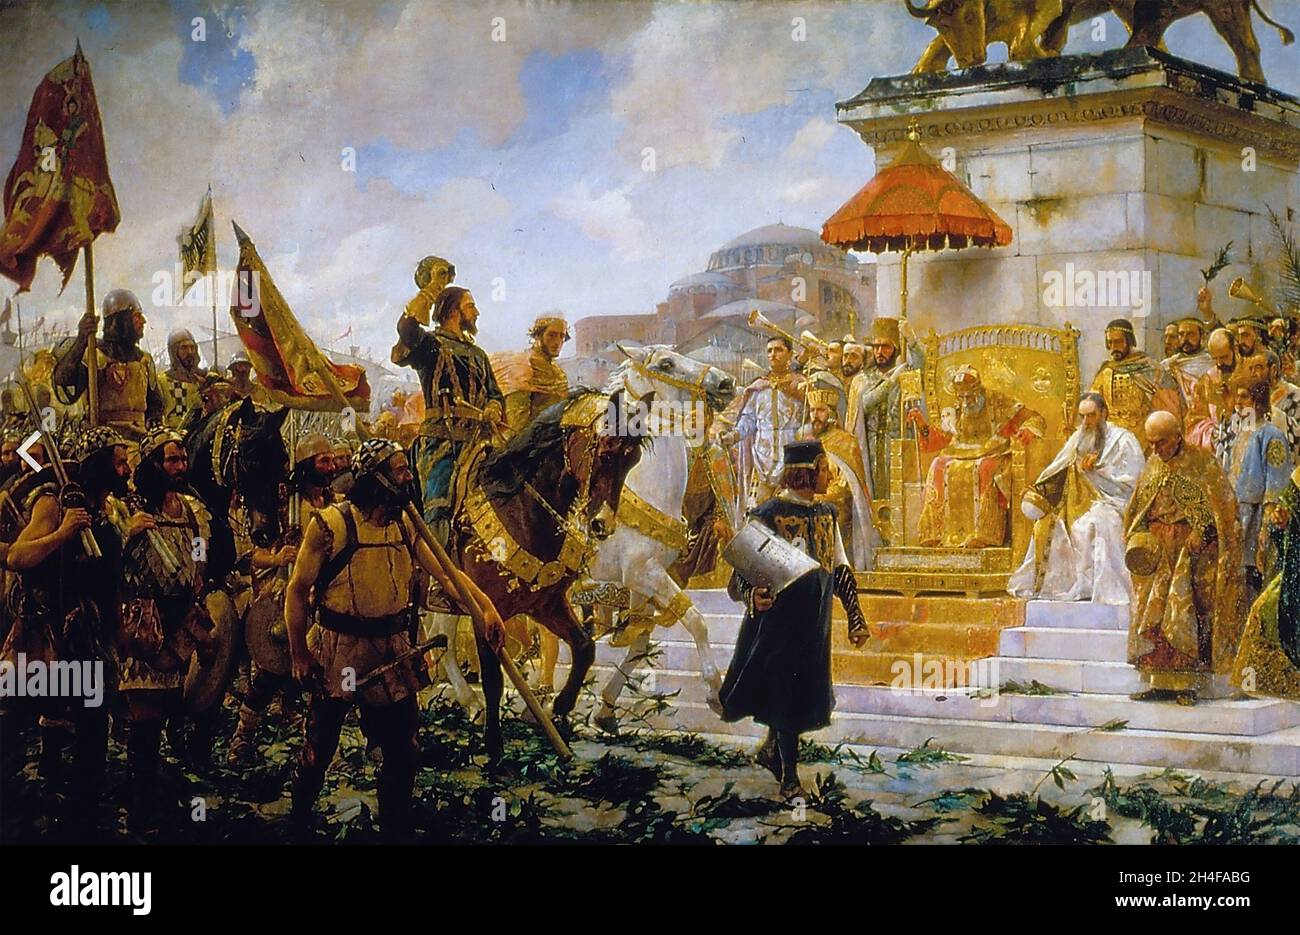 ROGER de FLOR (1267-1305) Neapolitan soldier enters Constantinople watched by the Byzantine emperor Andronicus II Palaeologus in September 1302. An 1888 painting by José Carbonero Stock Photo